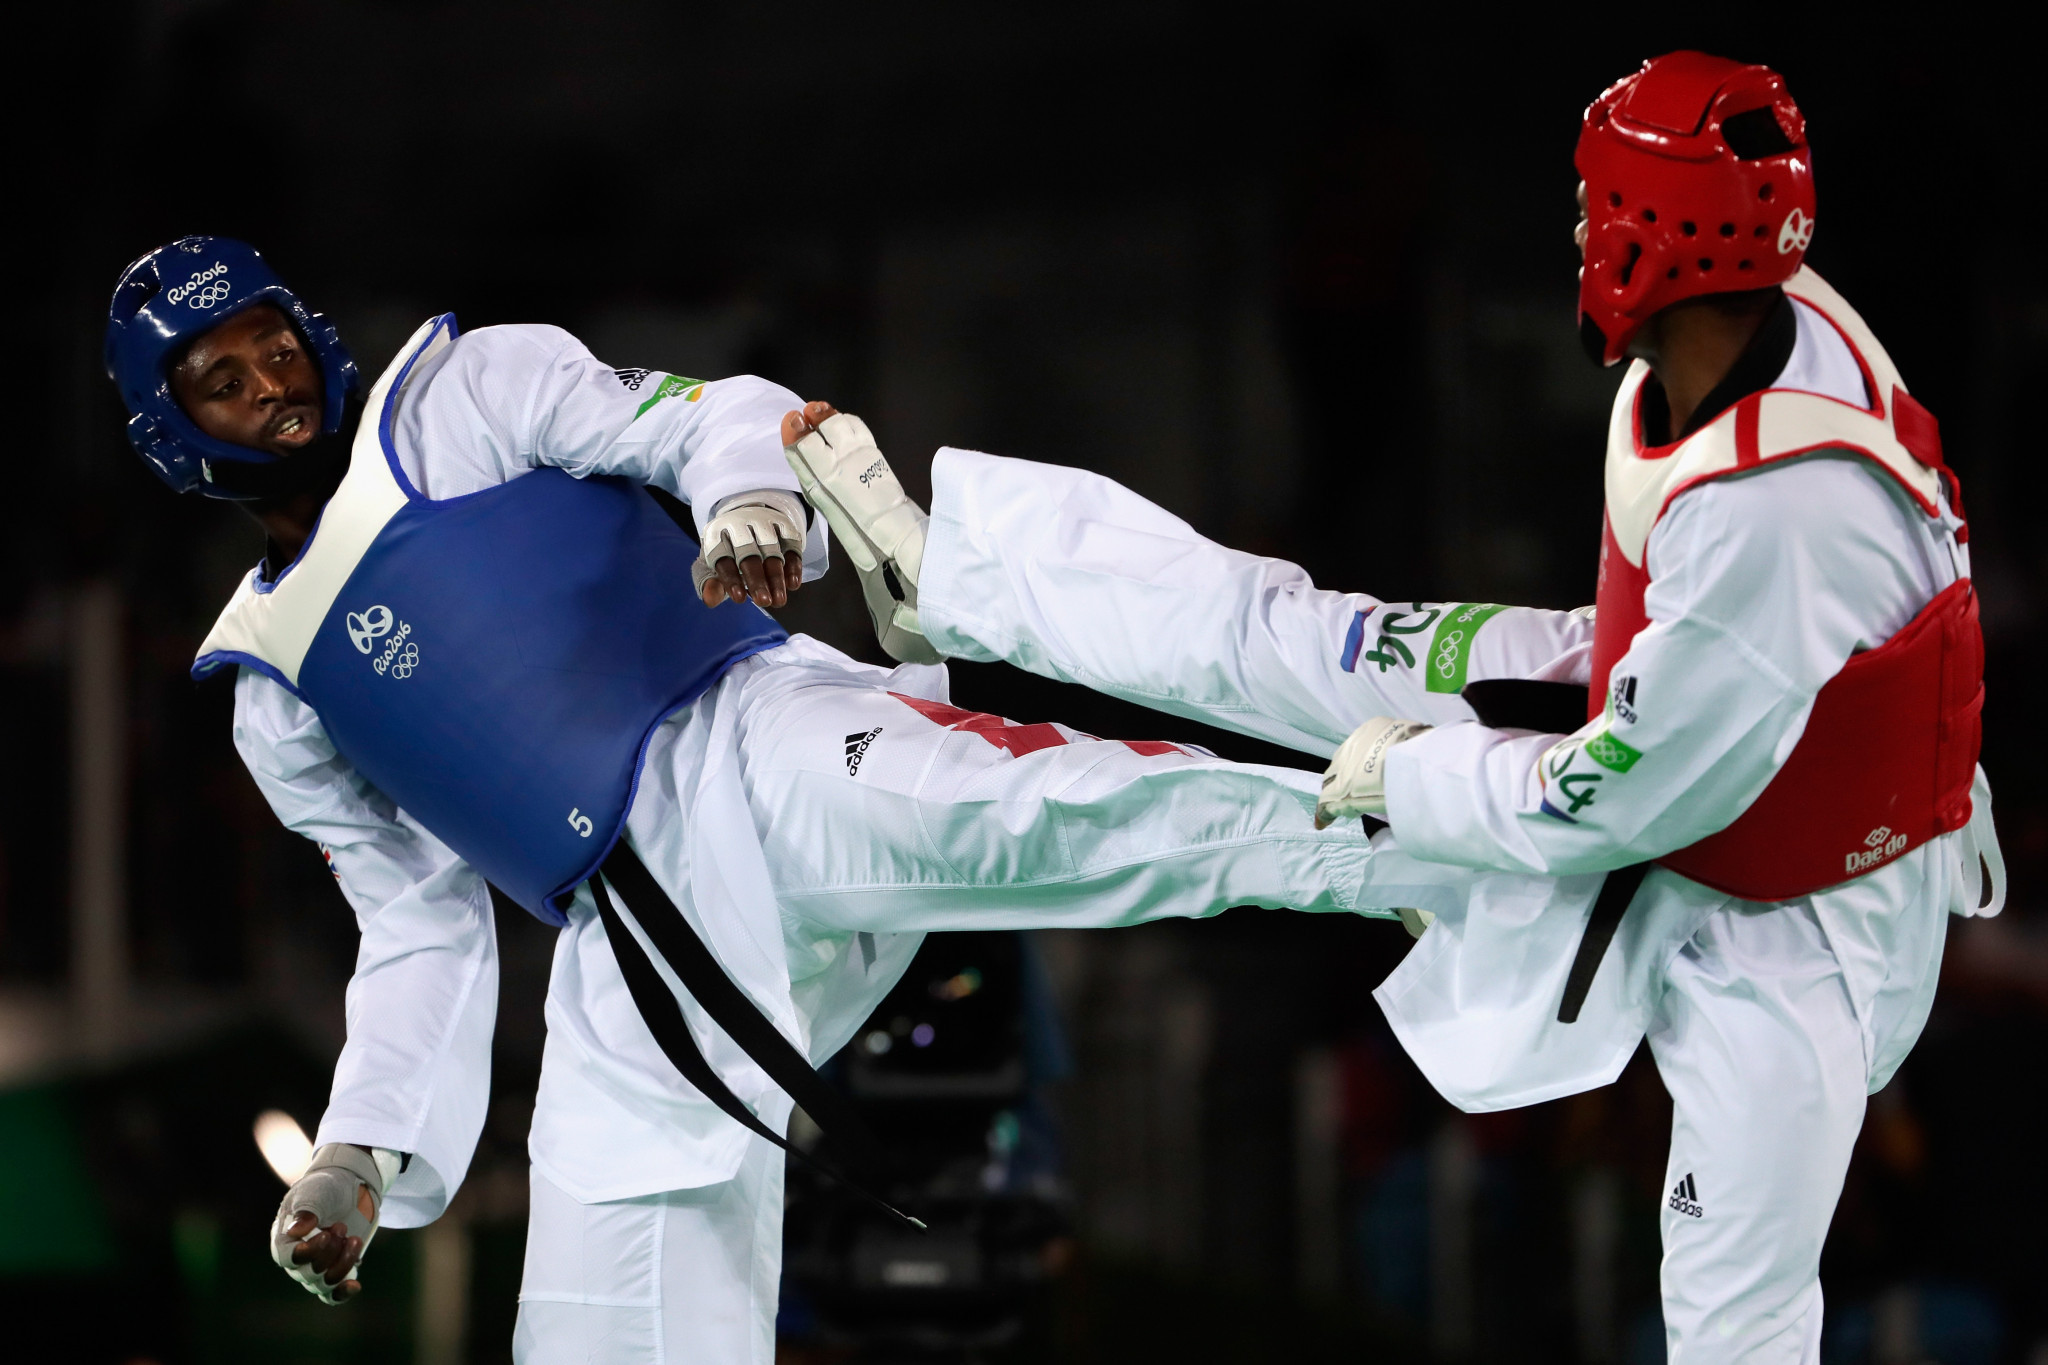 Mahama Cho was one of two gold medallists for Great Britain on the last day of the World Taekwondo President's Cup for Europe region in Antalya ©Getty Images